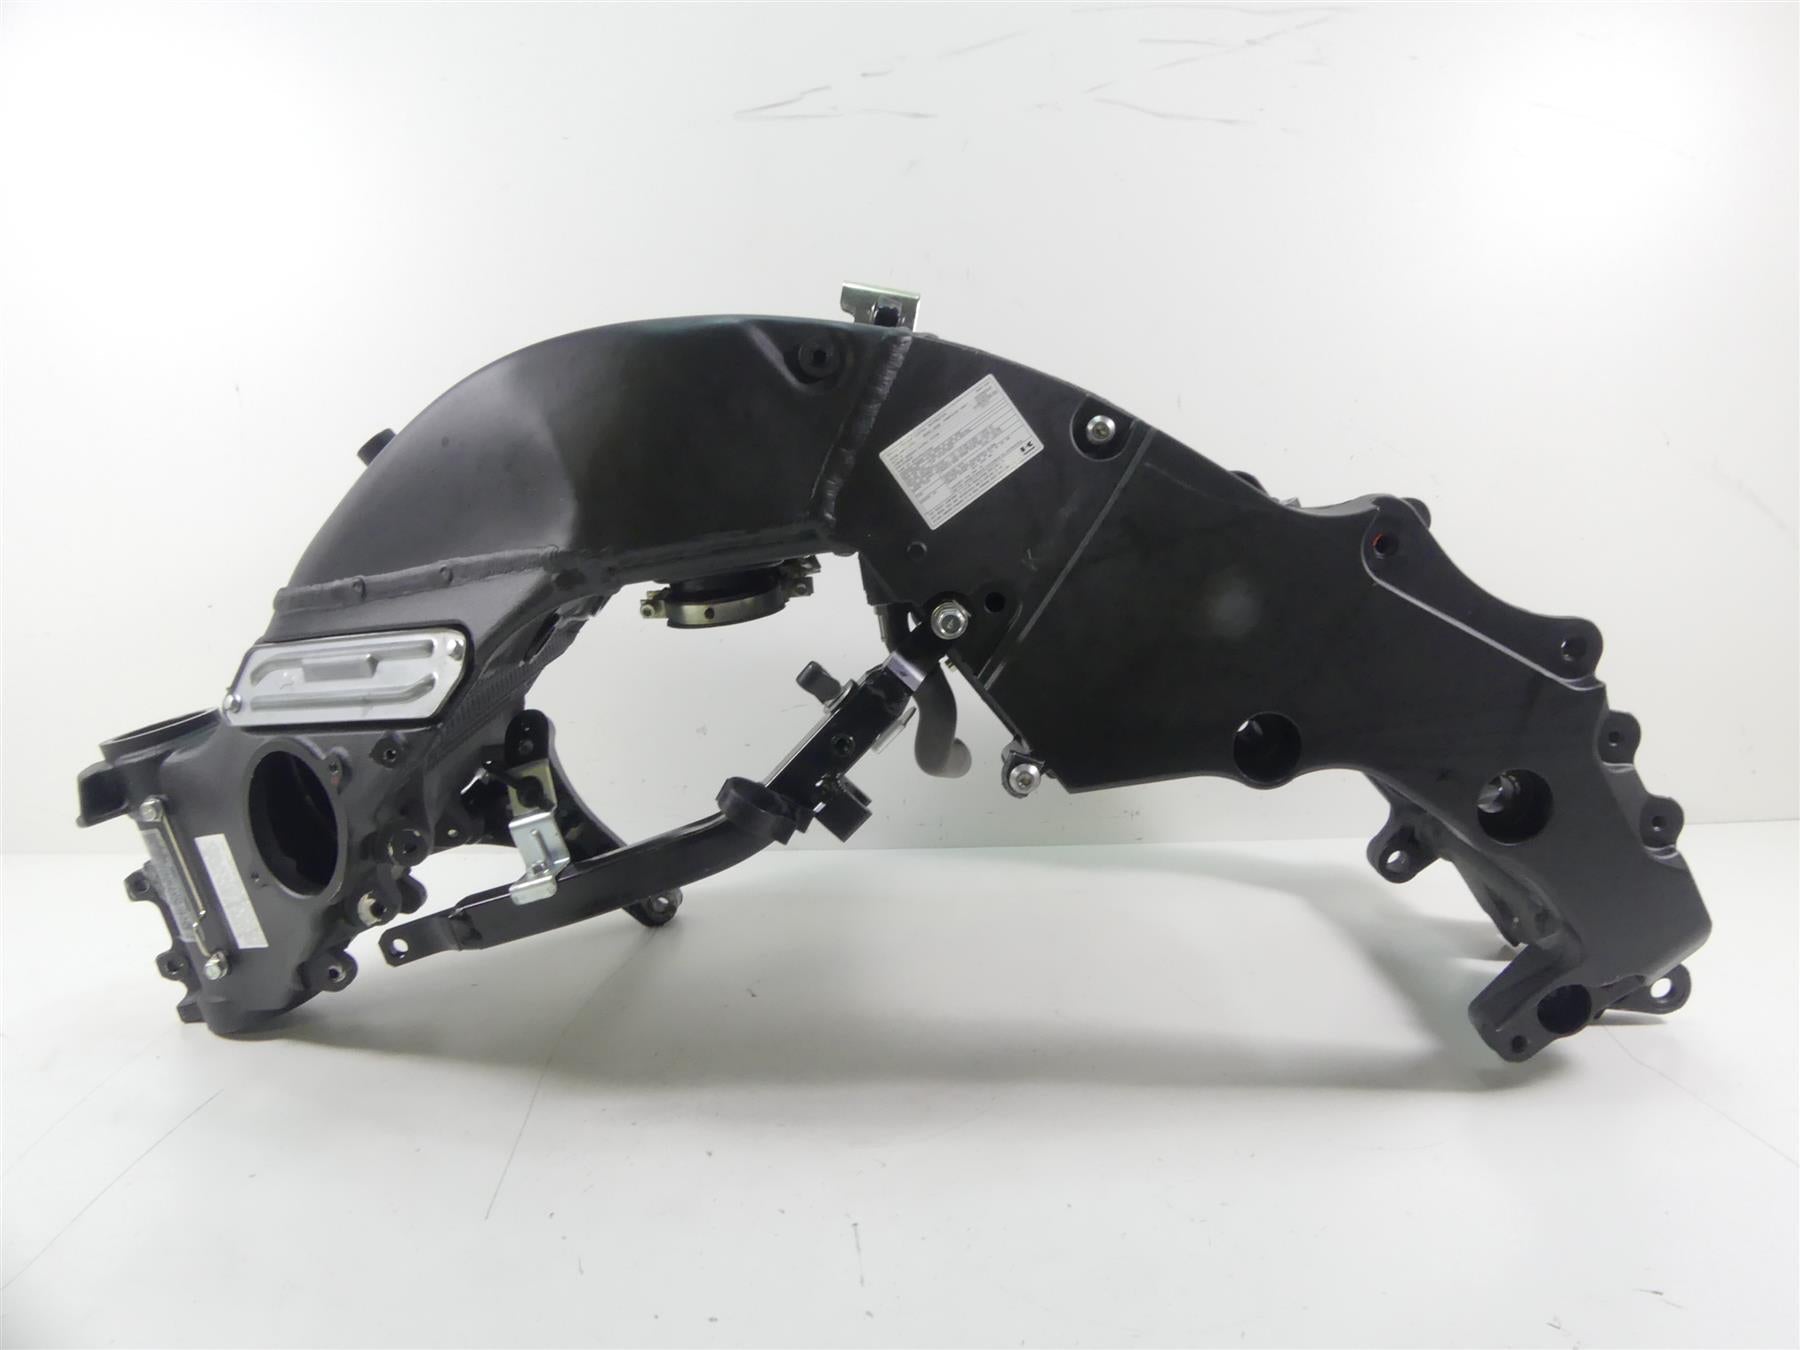 2019 Kawasaki ZX1400 ZX-14R Ninja Straight Main Frame Chassis With  Mississippi Salvage Title 32160-0820-18R